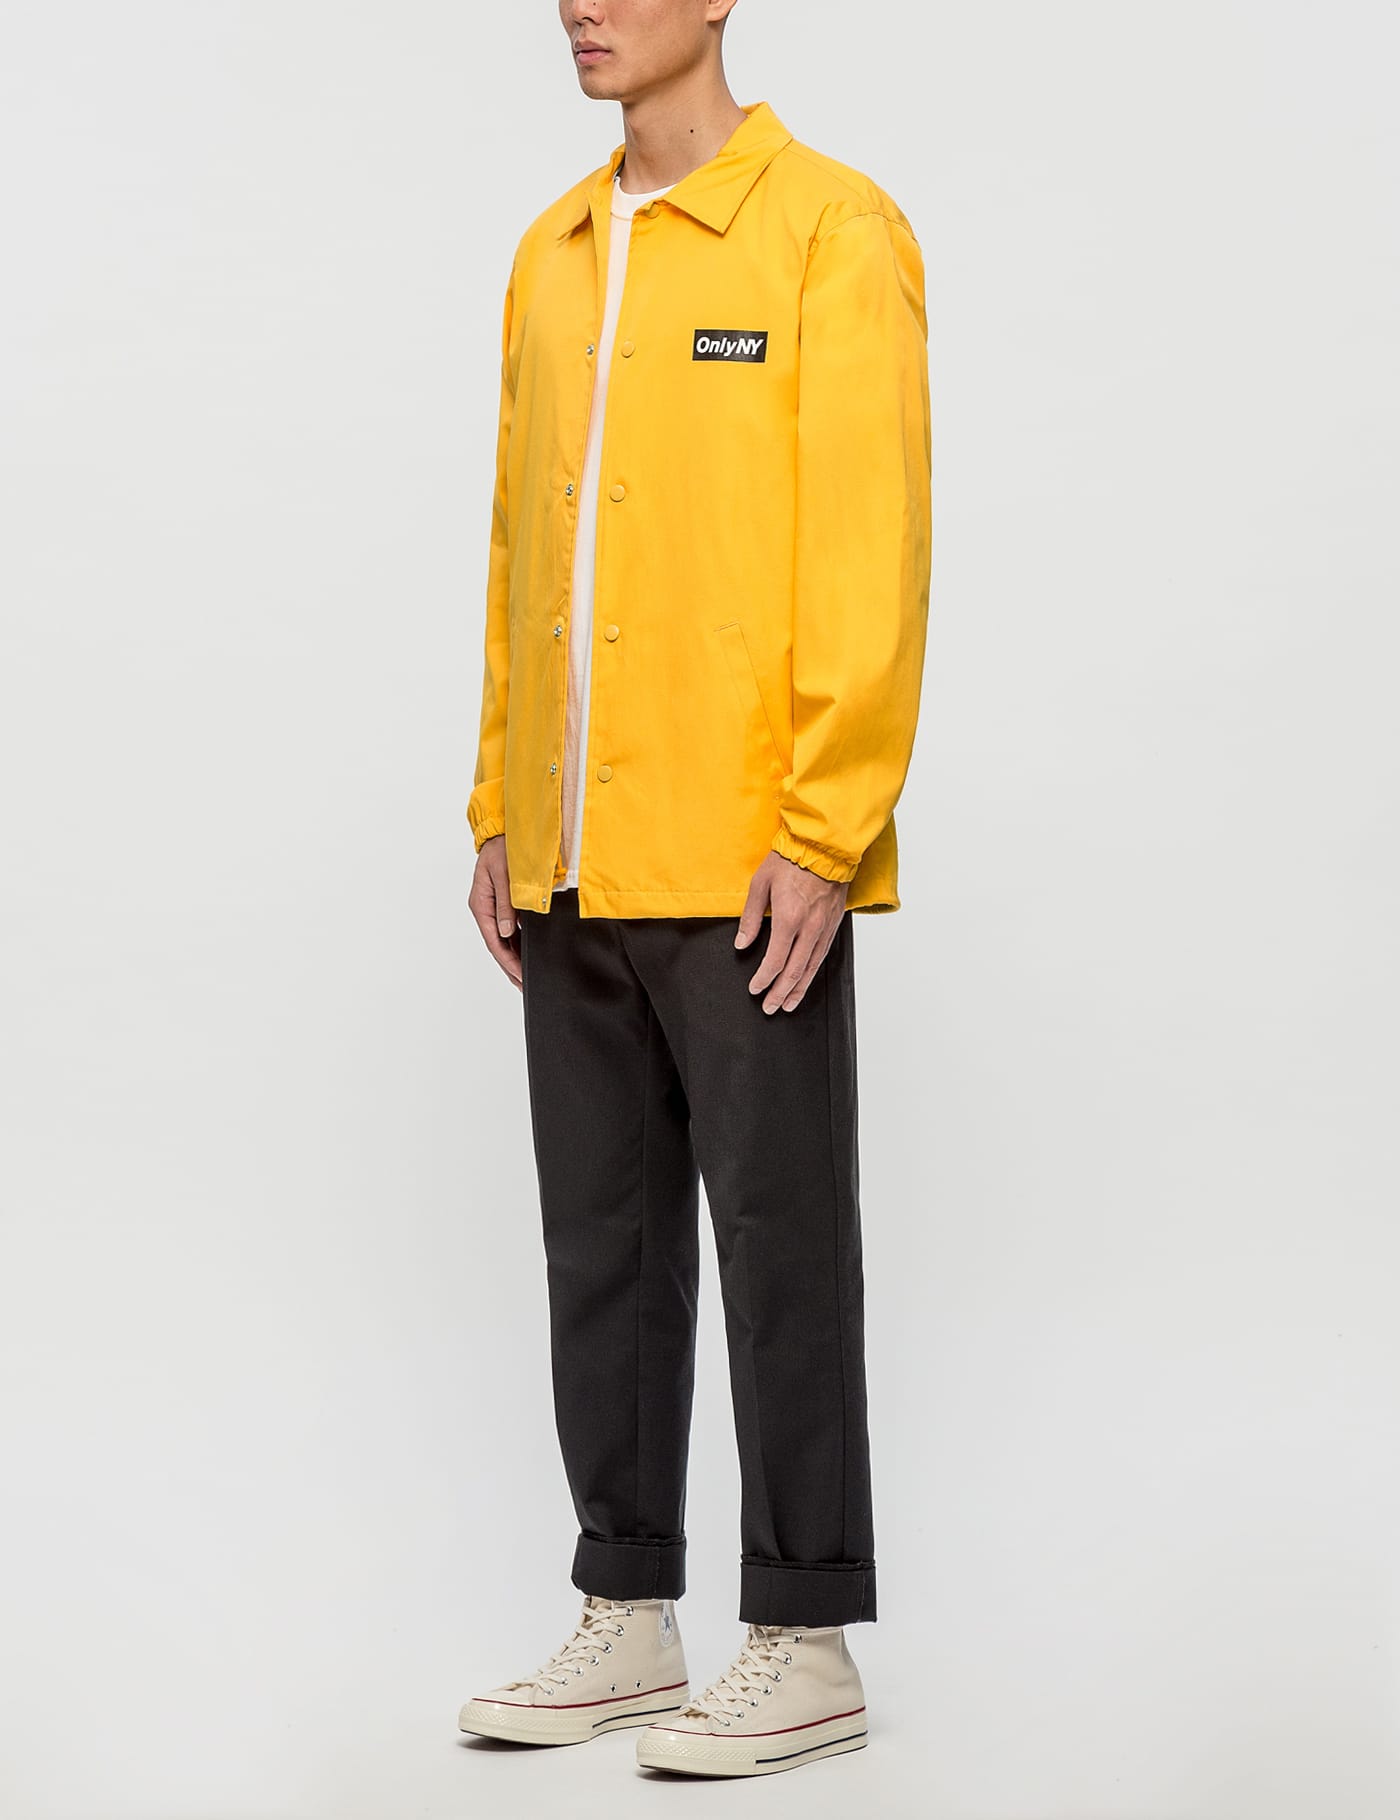 Only Ny - New York Love Coach Jacket | HBX - Globally Curated 